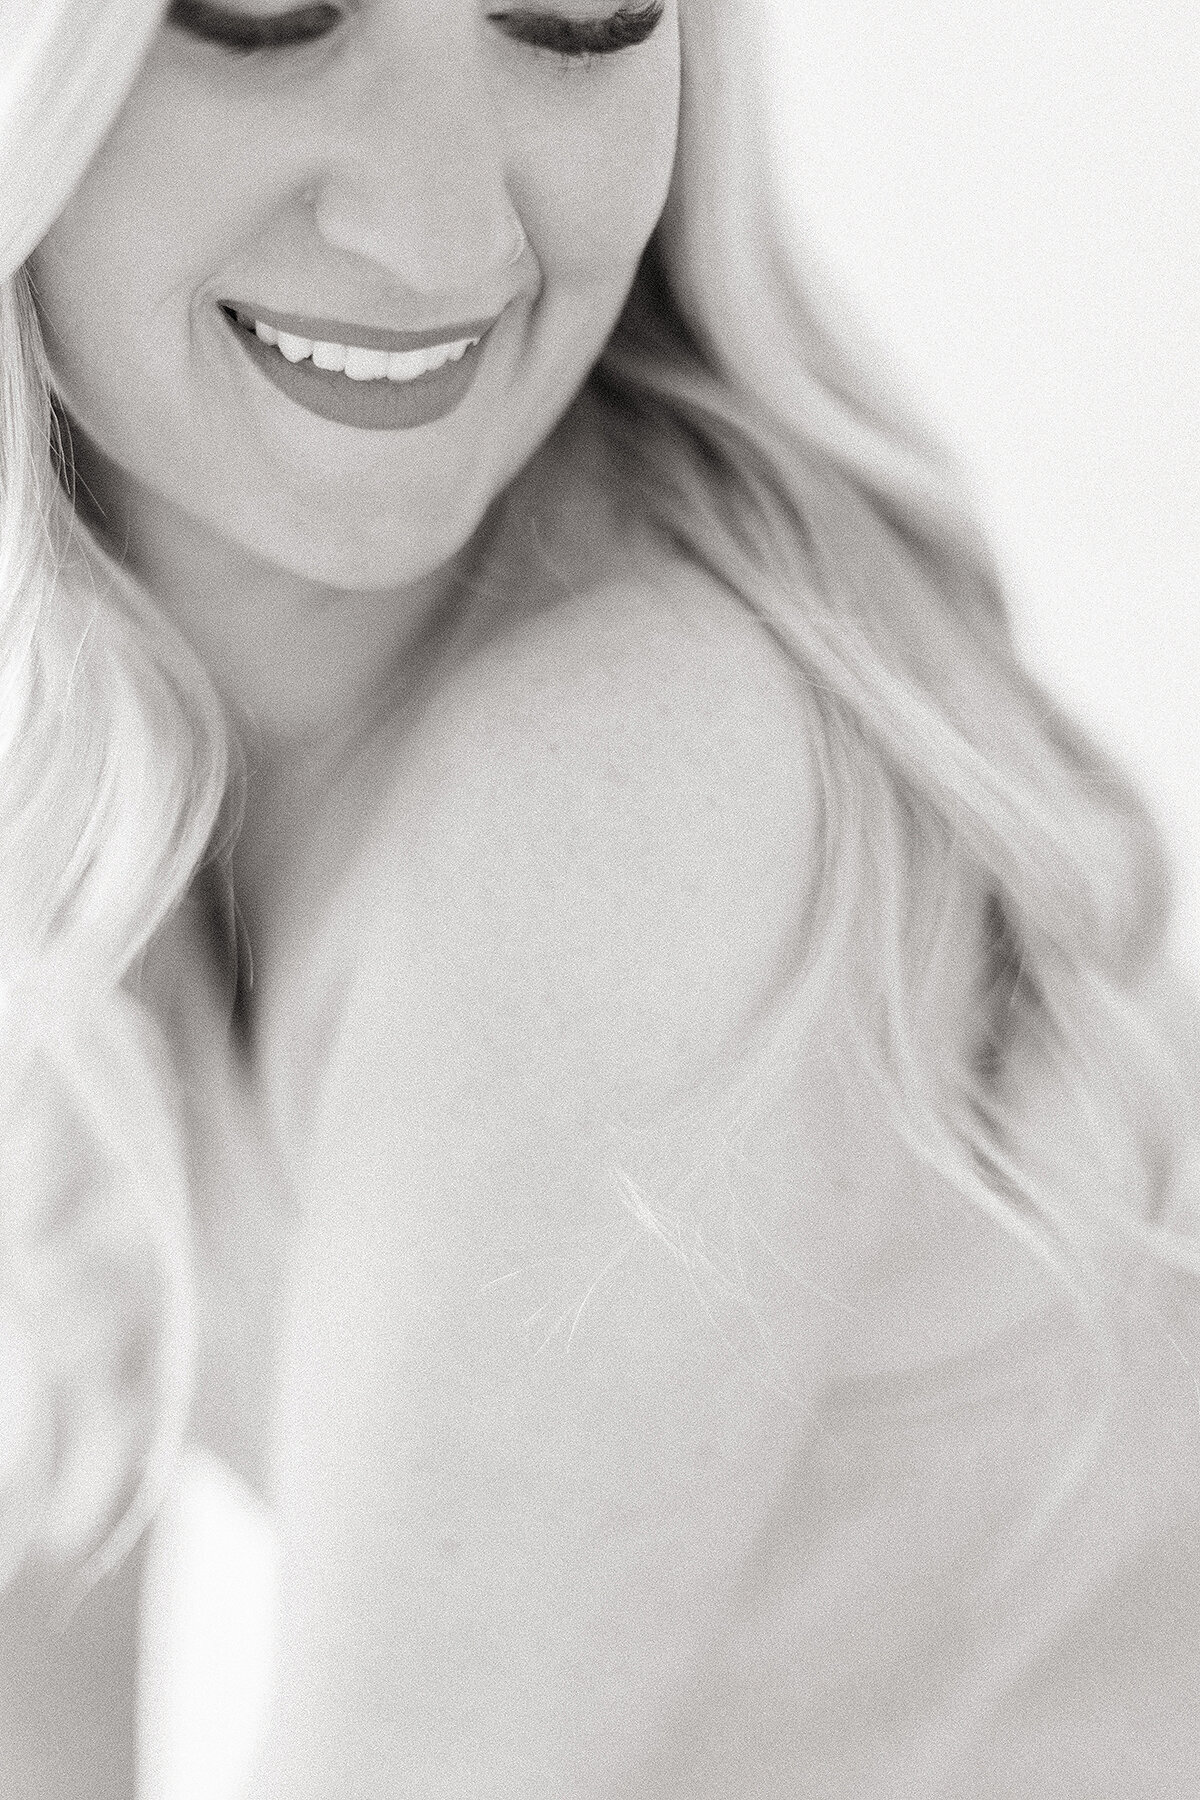 Close up elegant black and white boudoir portrait of a woman smiling and looking over her shoulder.